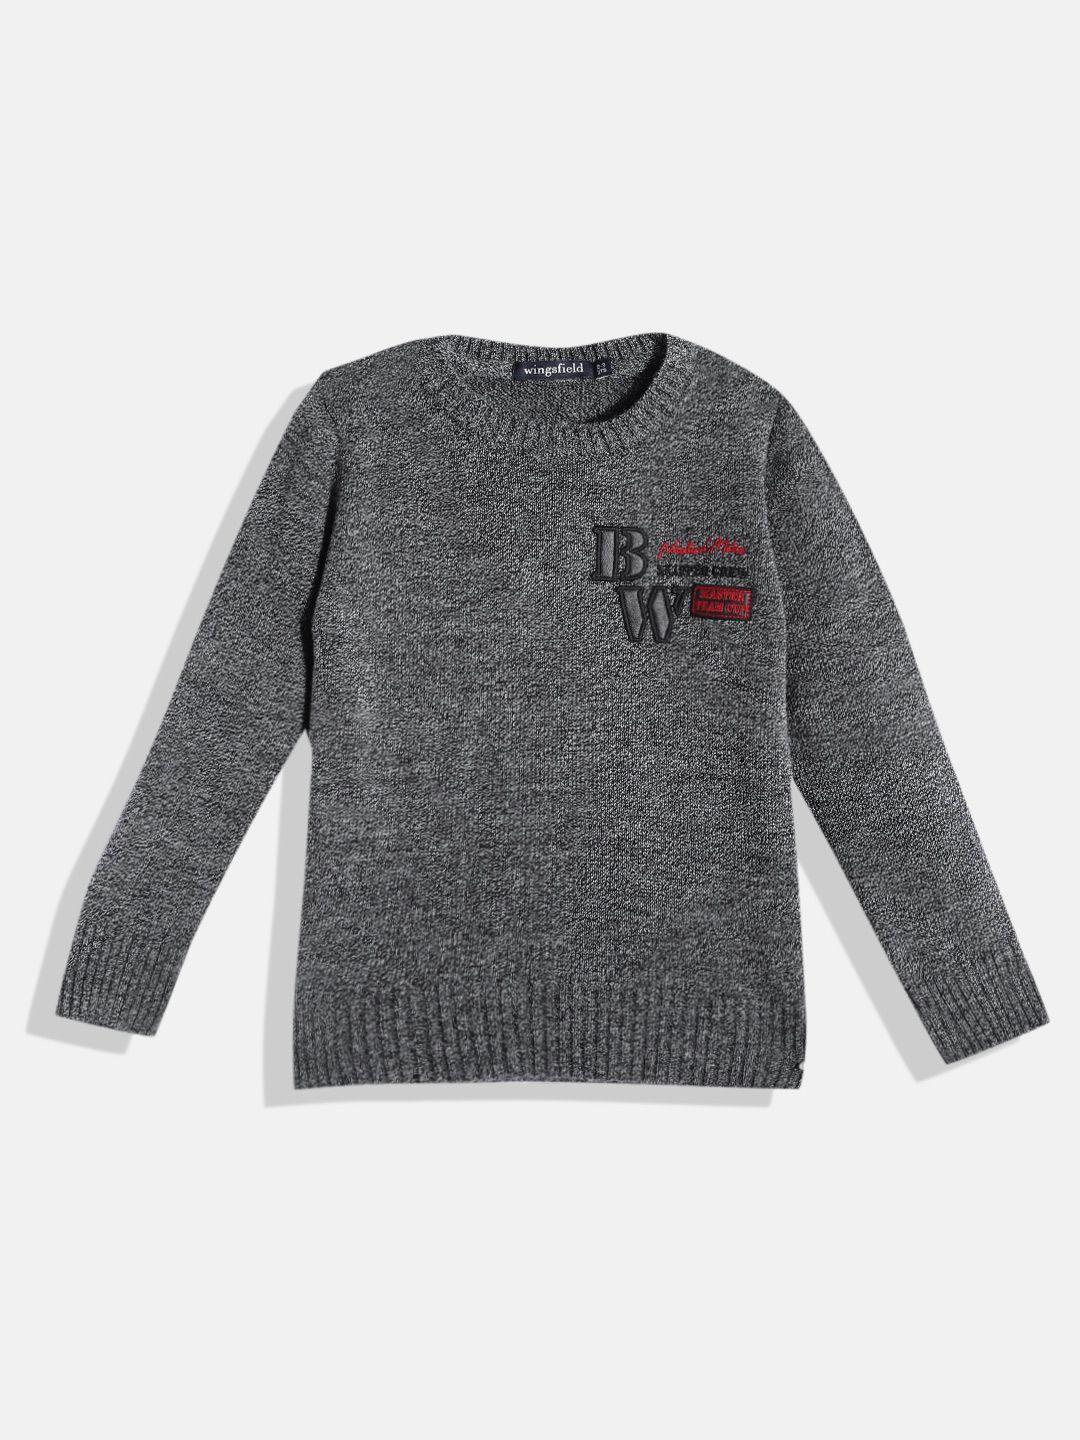 wingsfield boys charcoal grey acrylic pullover with embroidered detail